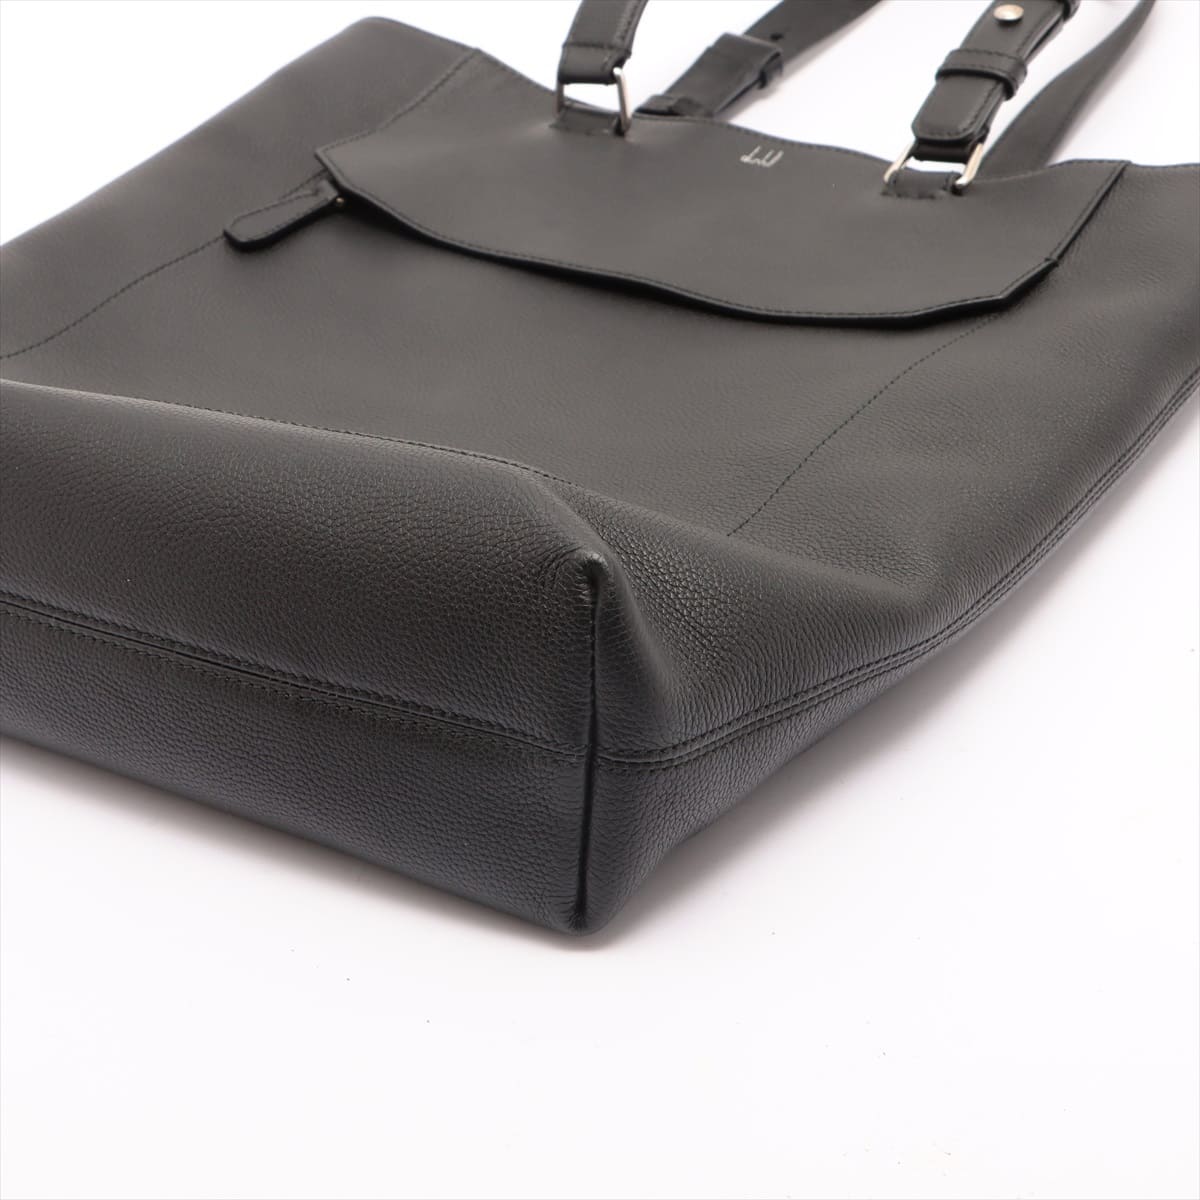 Dunhill Leather Tote bag Black